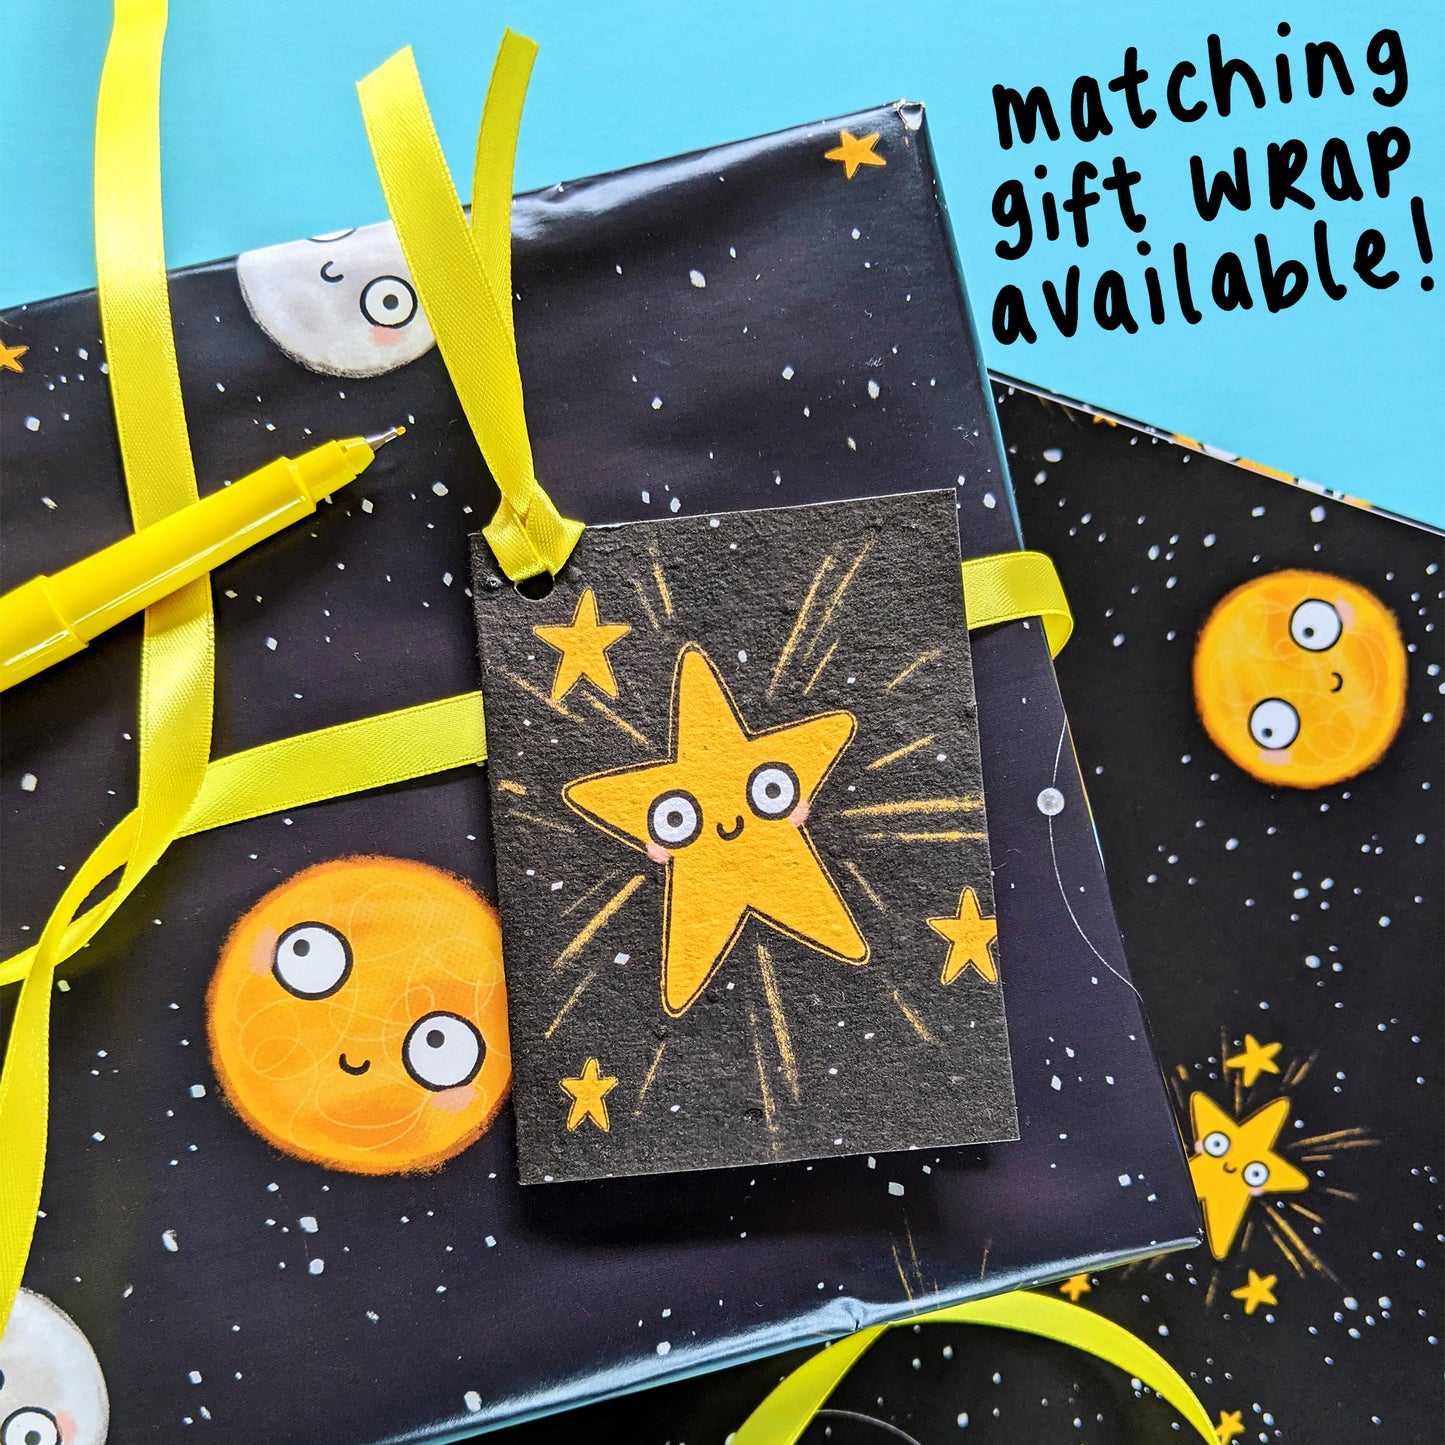 You're The Brightest Star Card